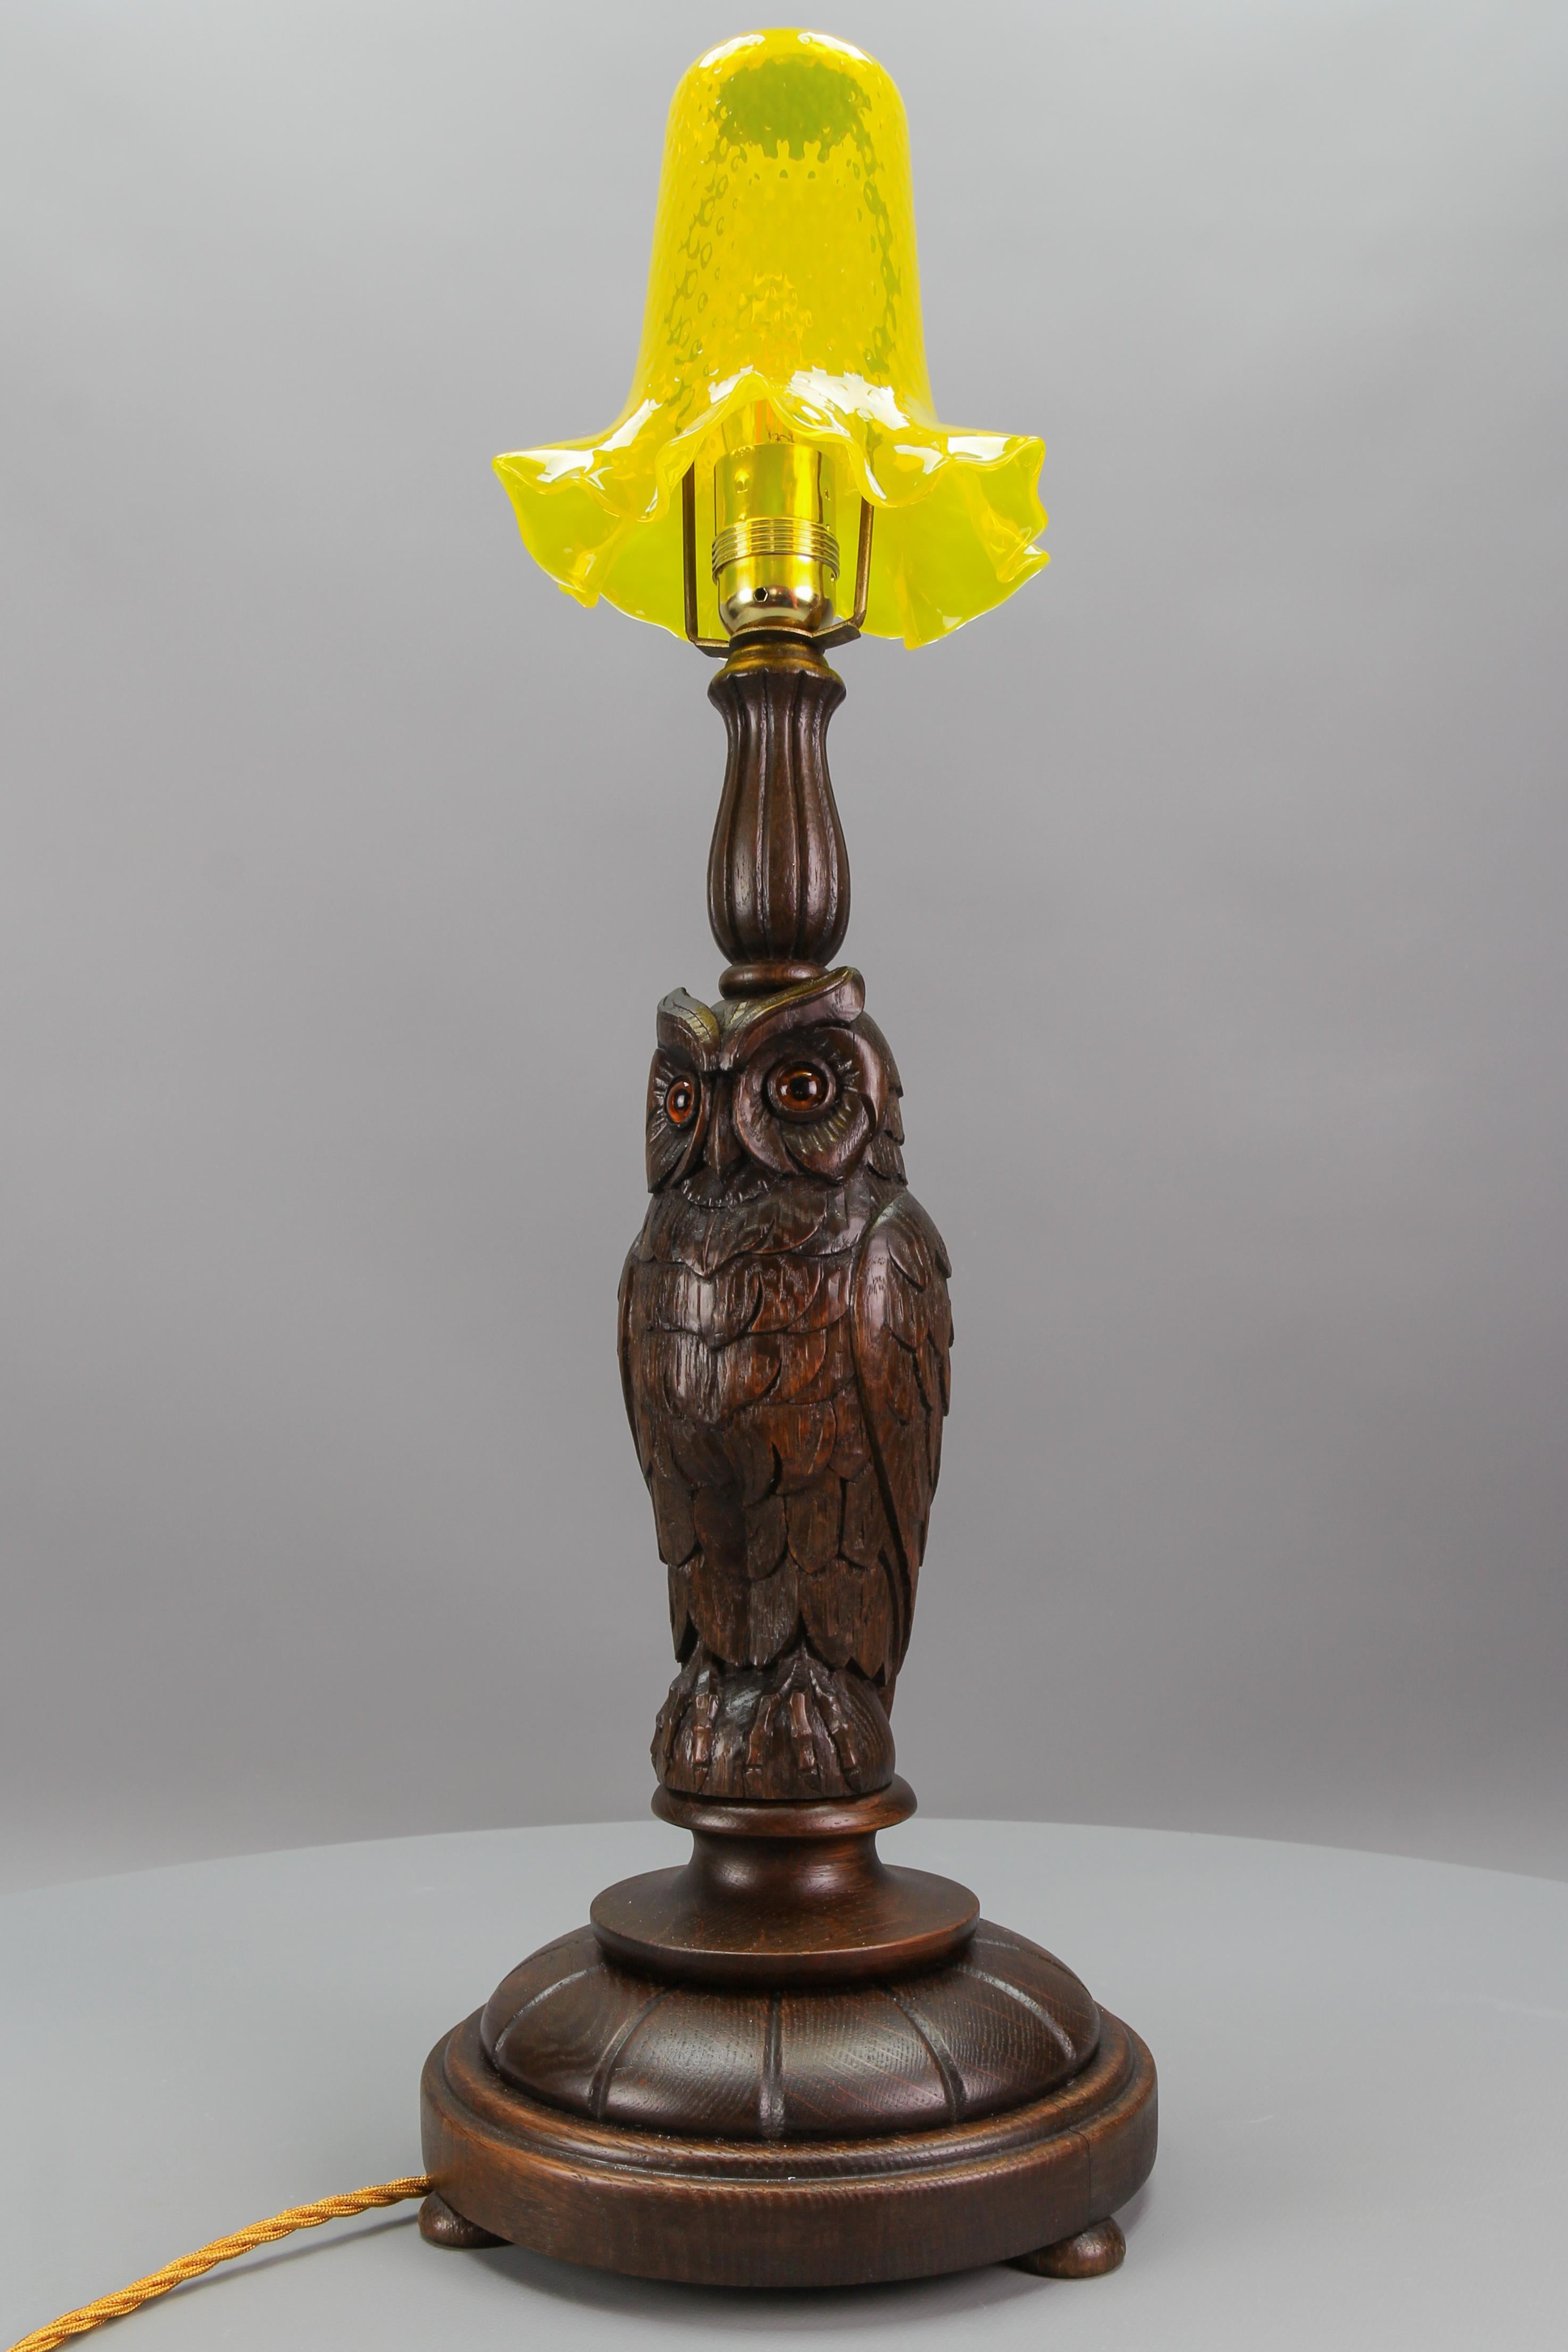 Art Deco Table Lamp with Owl Sculpture and Yellow Glass Lampshade, ca. 1920 For Sale 13